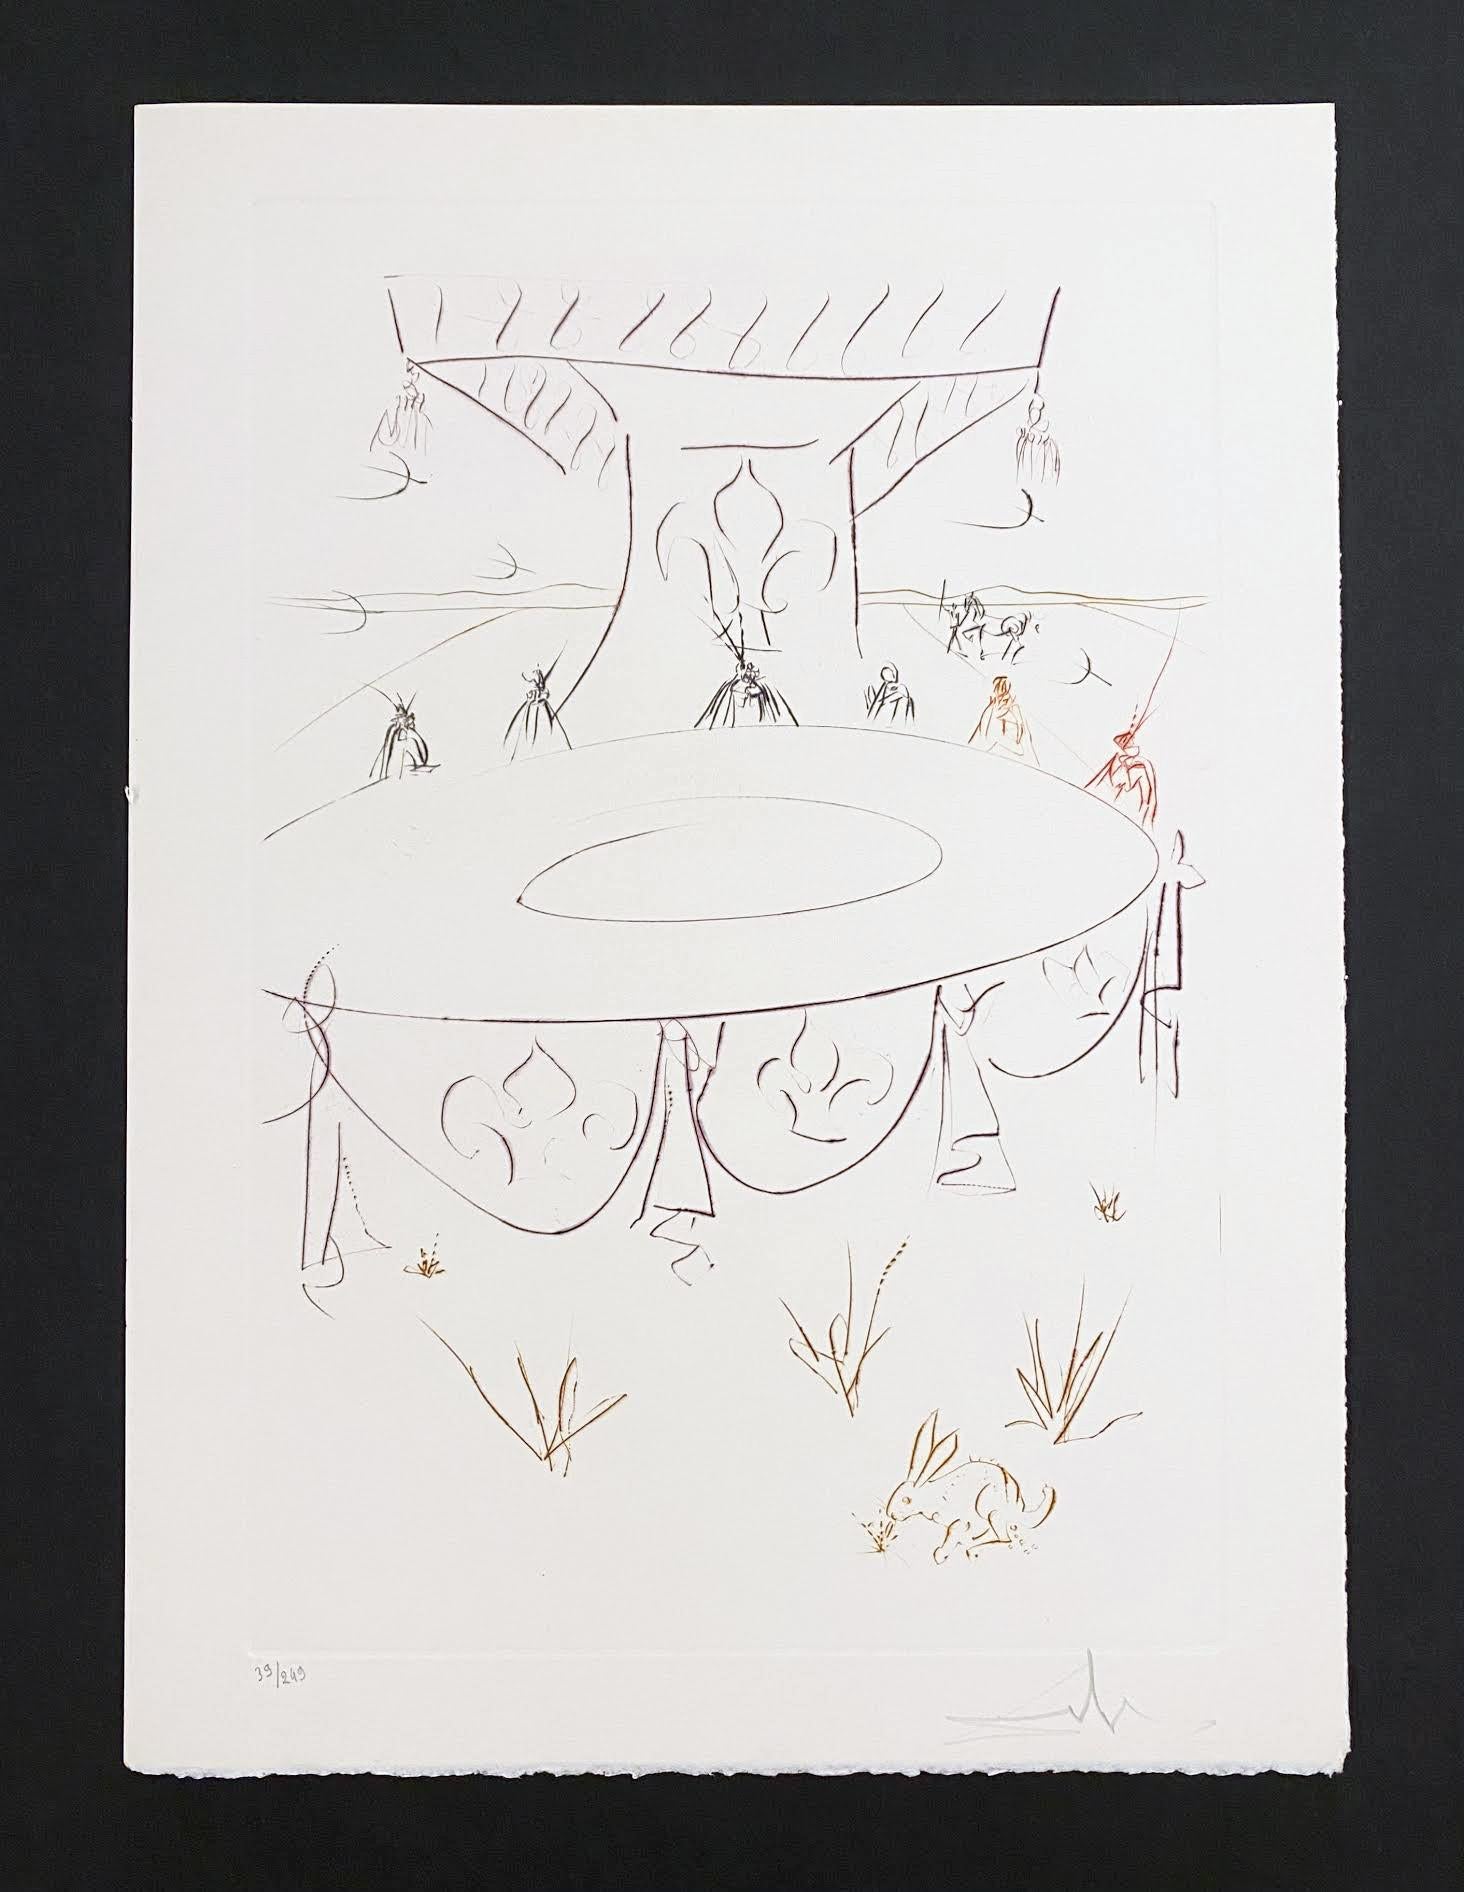 Salvador Dali The Quest for the Grail Lancelot, Comrade of the Round Table
Artist: Salvador Dali
Medium: Medium Drypoint on Arches
Title: Lancelot, Comrade of the Round Table
Portfolio: The Quest for the Grail
Year: 1975
Edition: 39/249
Signed: